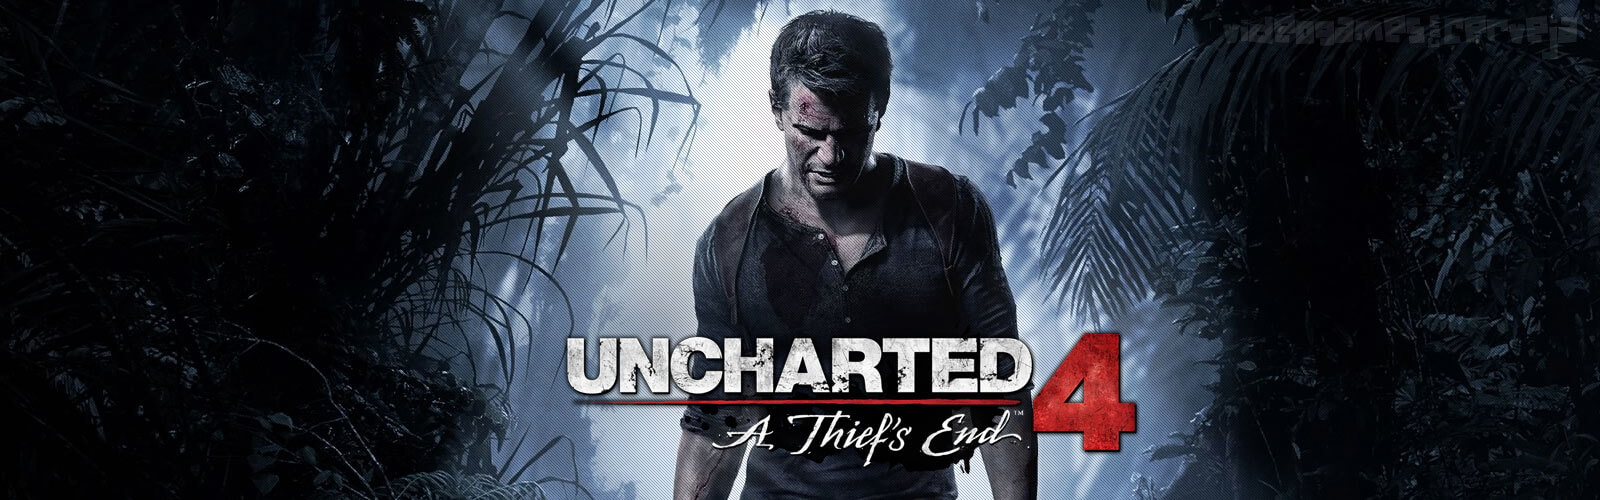 Análise - Uncharted 4: A Thief's End Cover